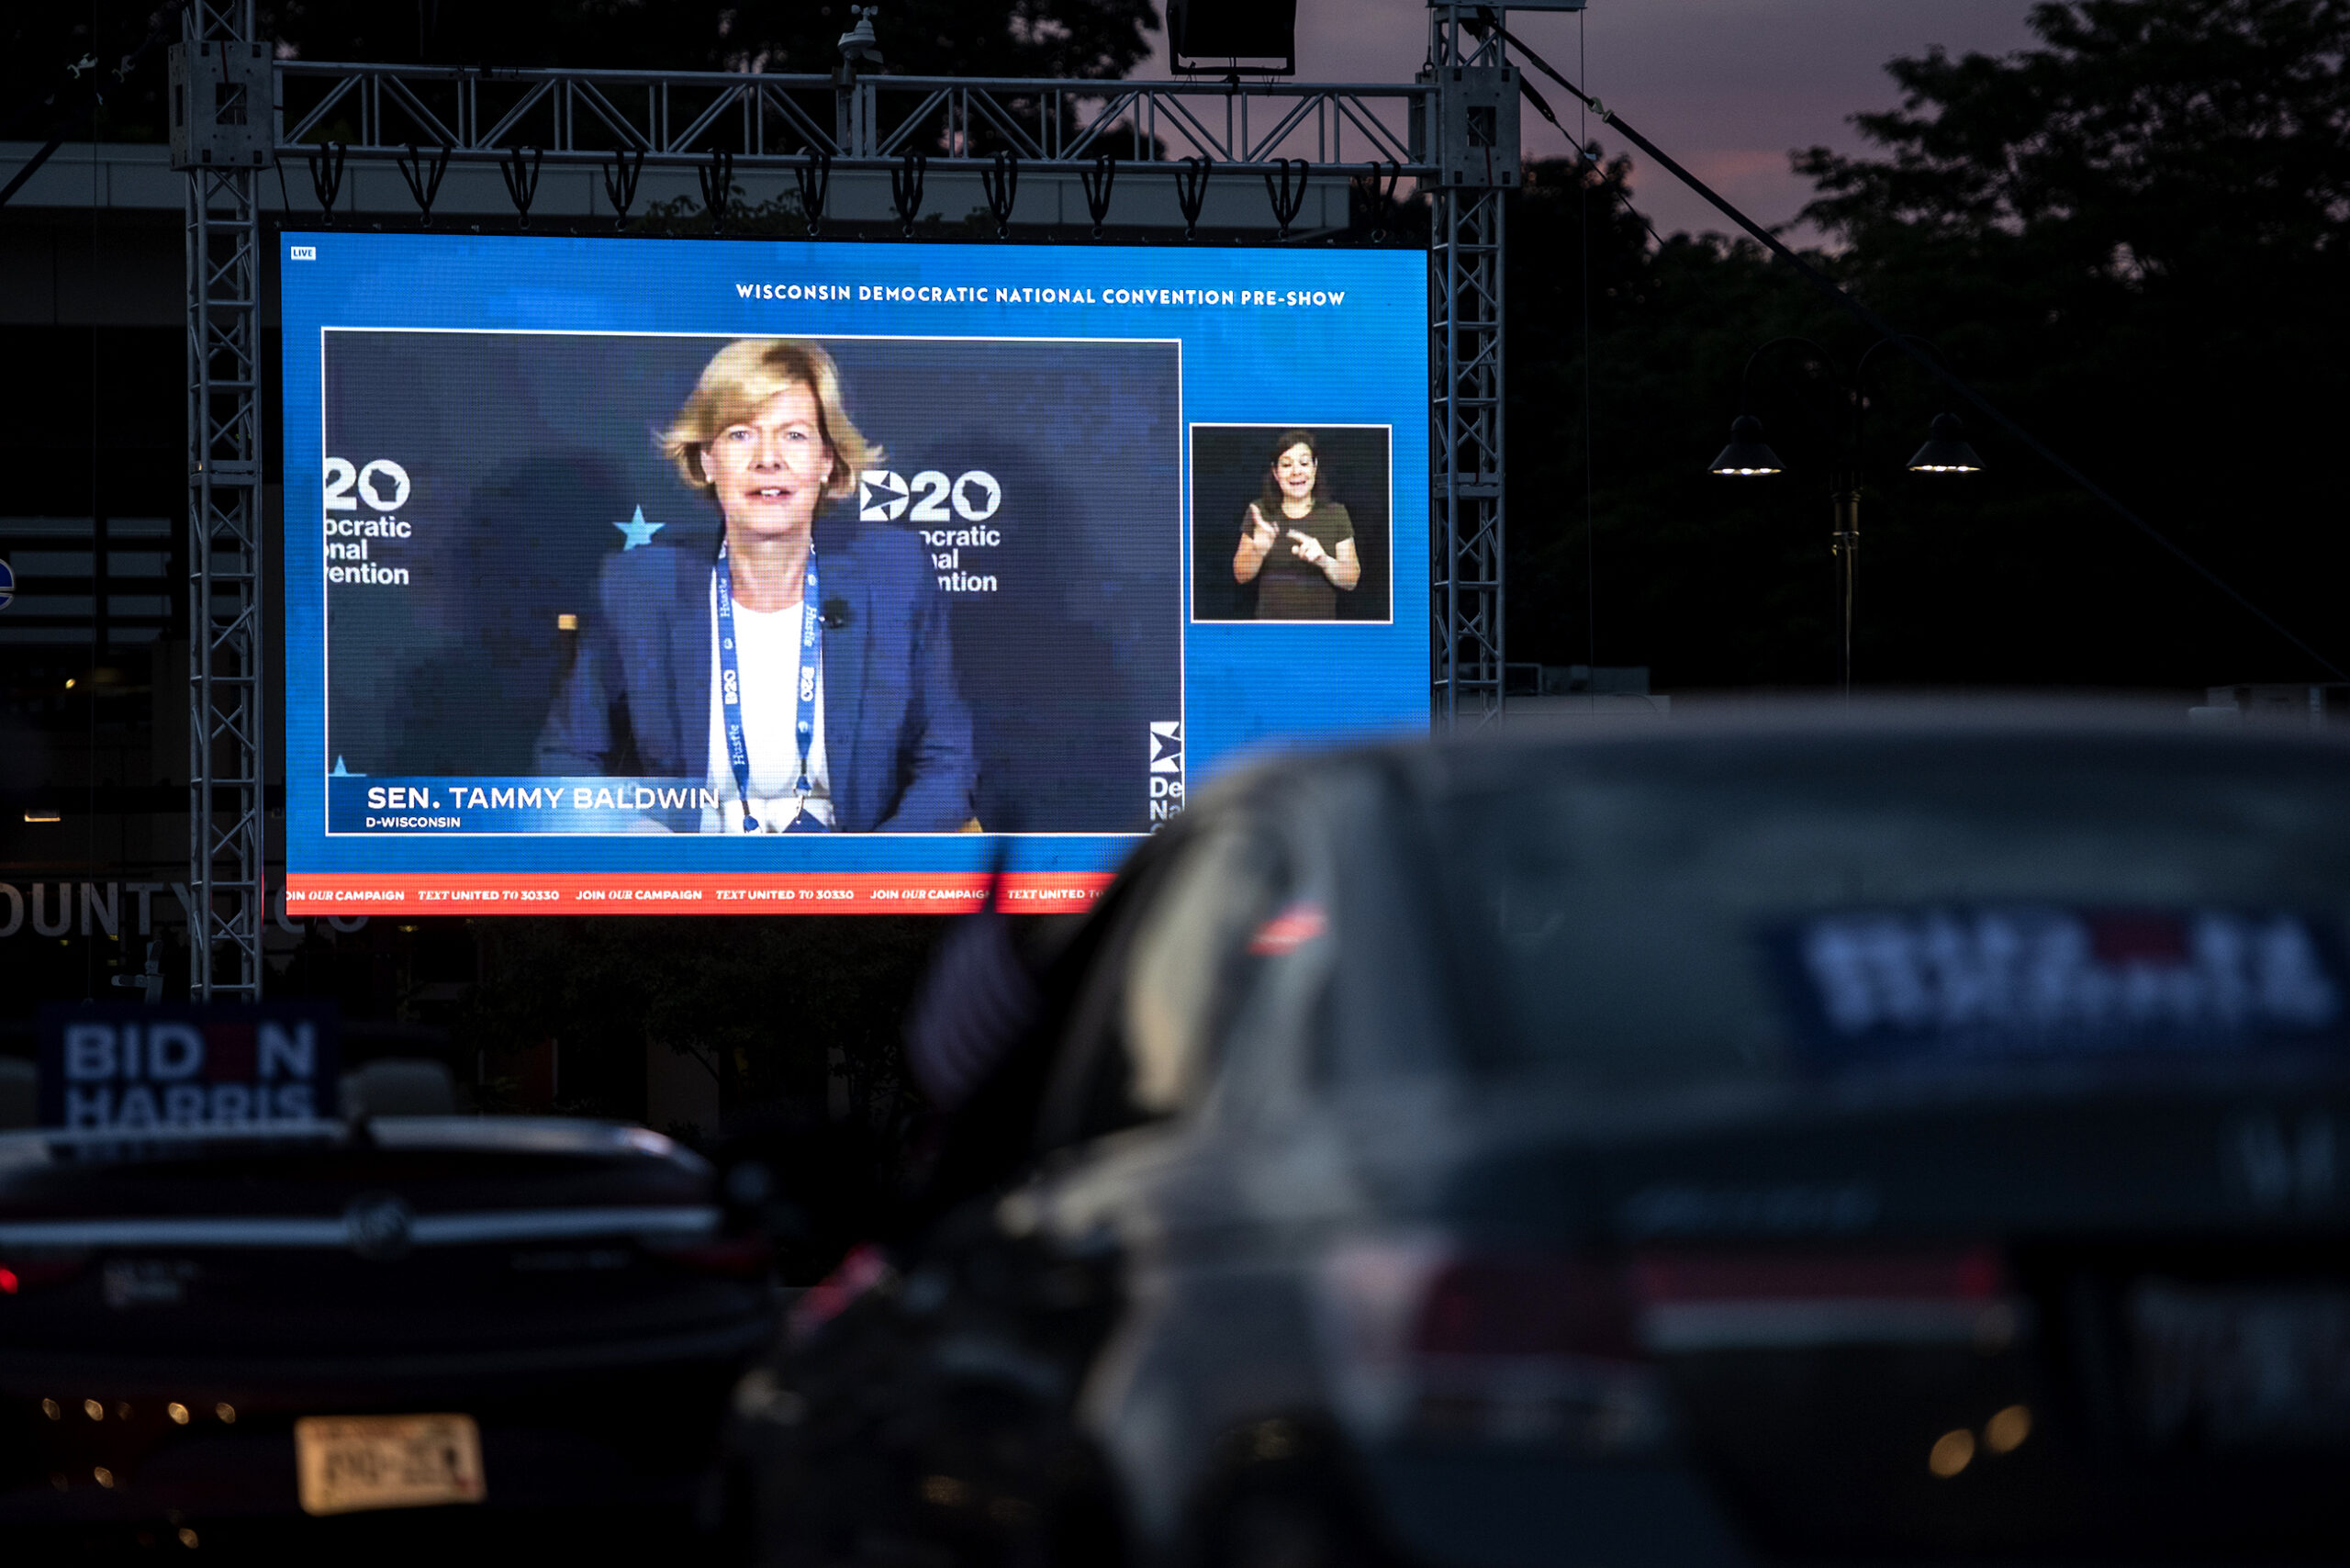 Tammy Baldwin Focuses On Health Care, But Not COVID-19, During Convention Speech